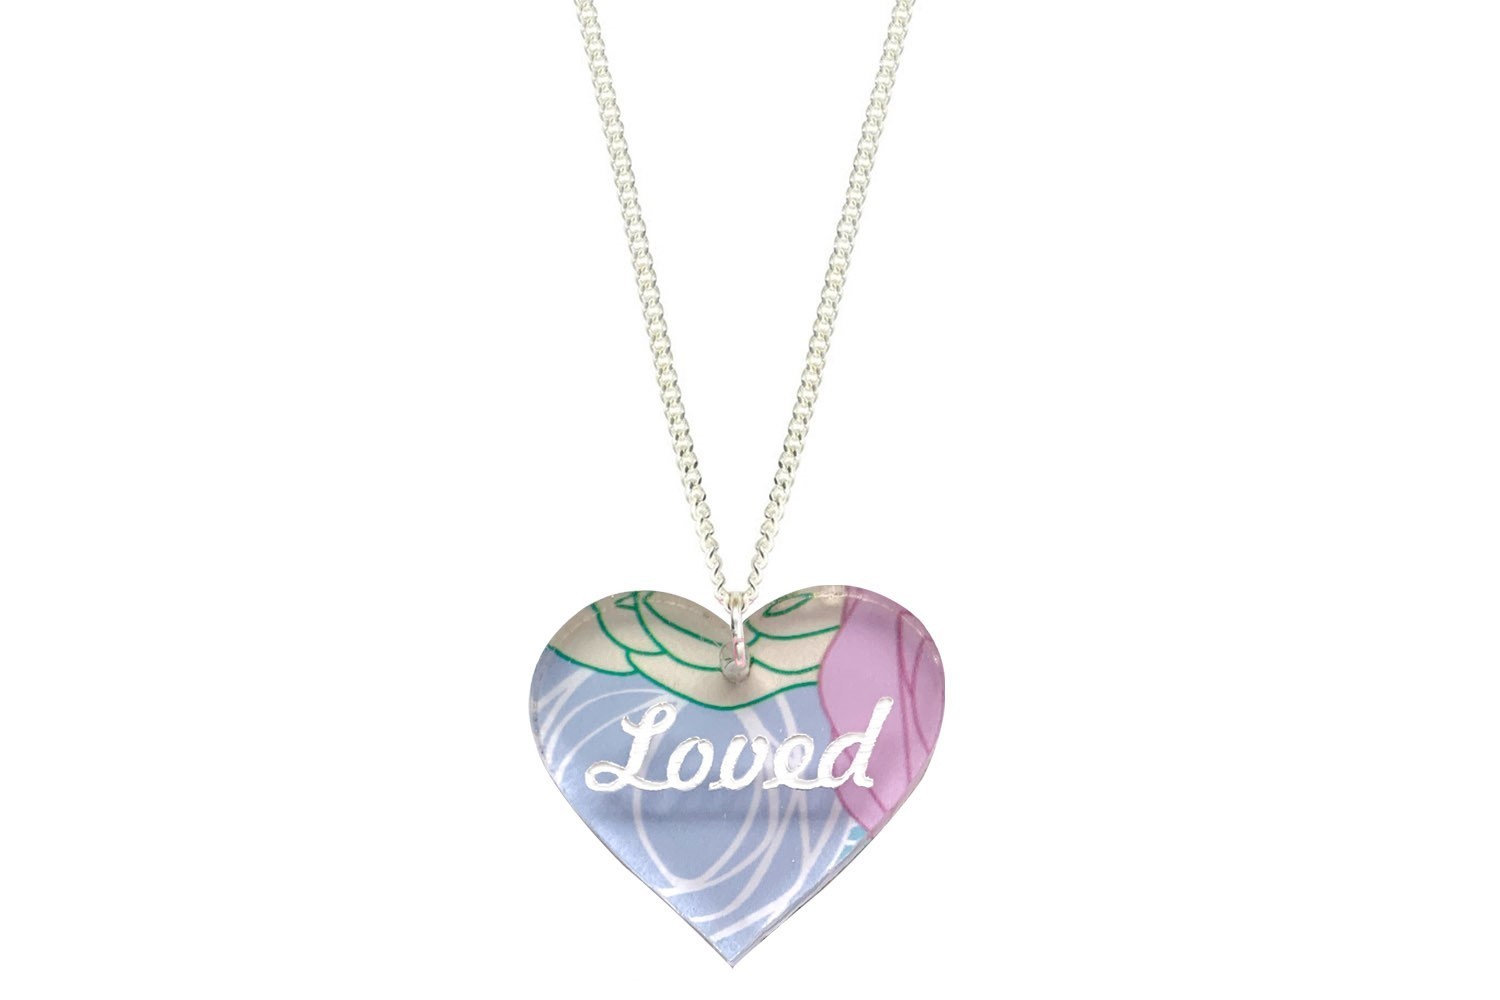 Custom Heart Pendant with Name or Saying on Chain Necklace